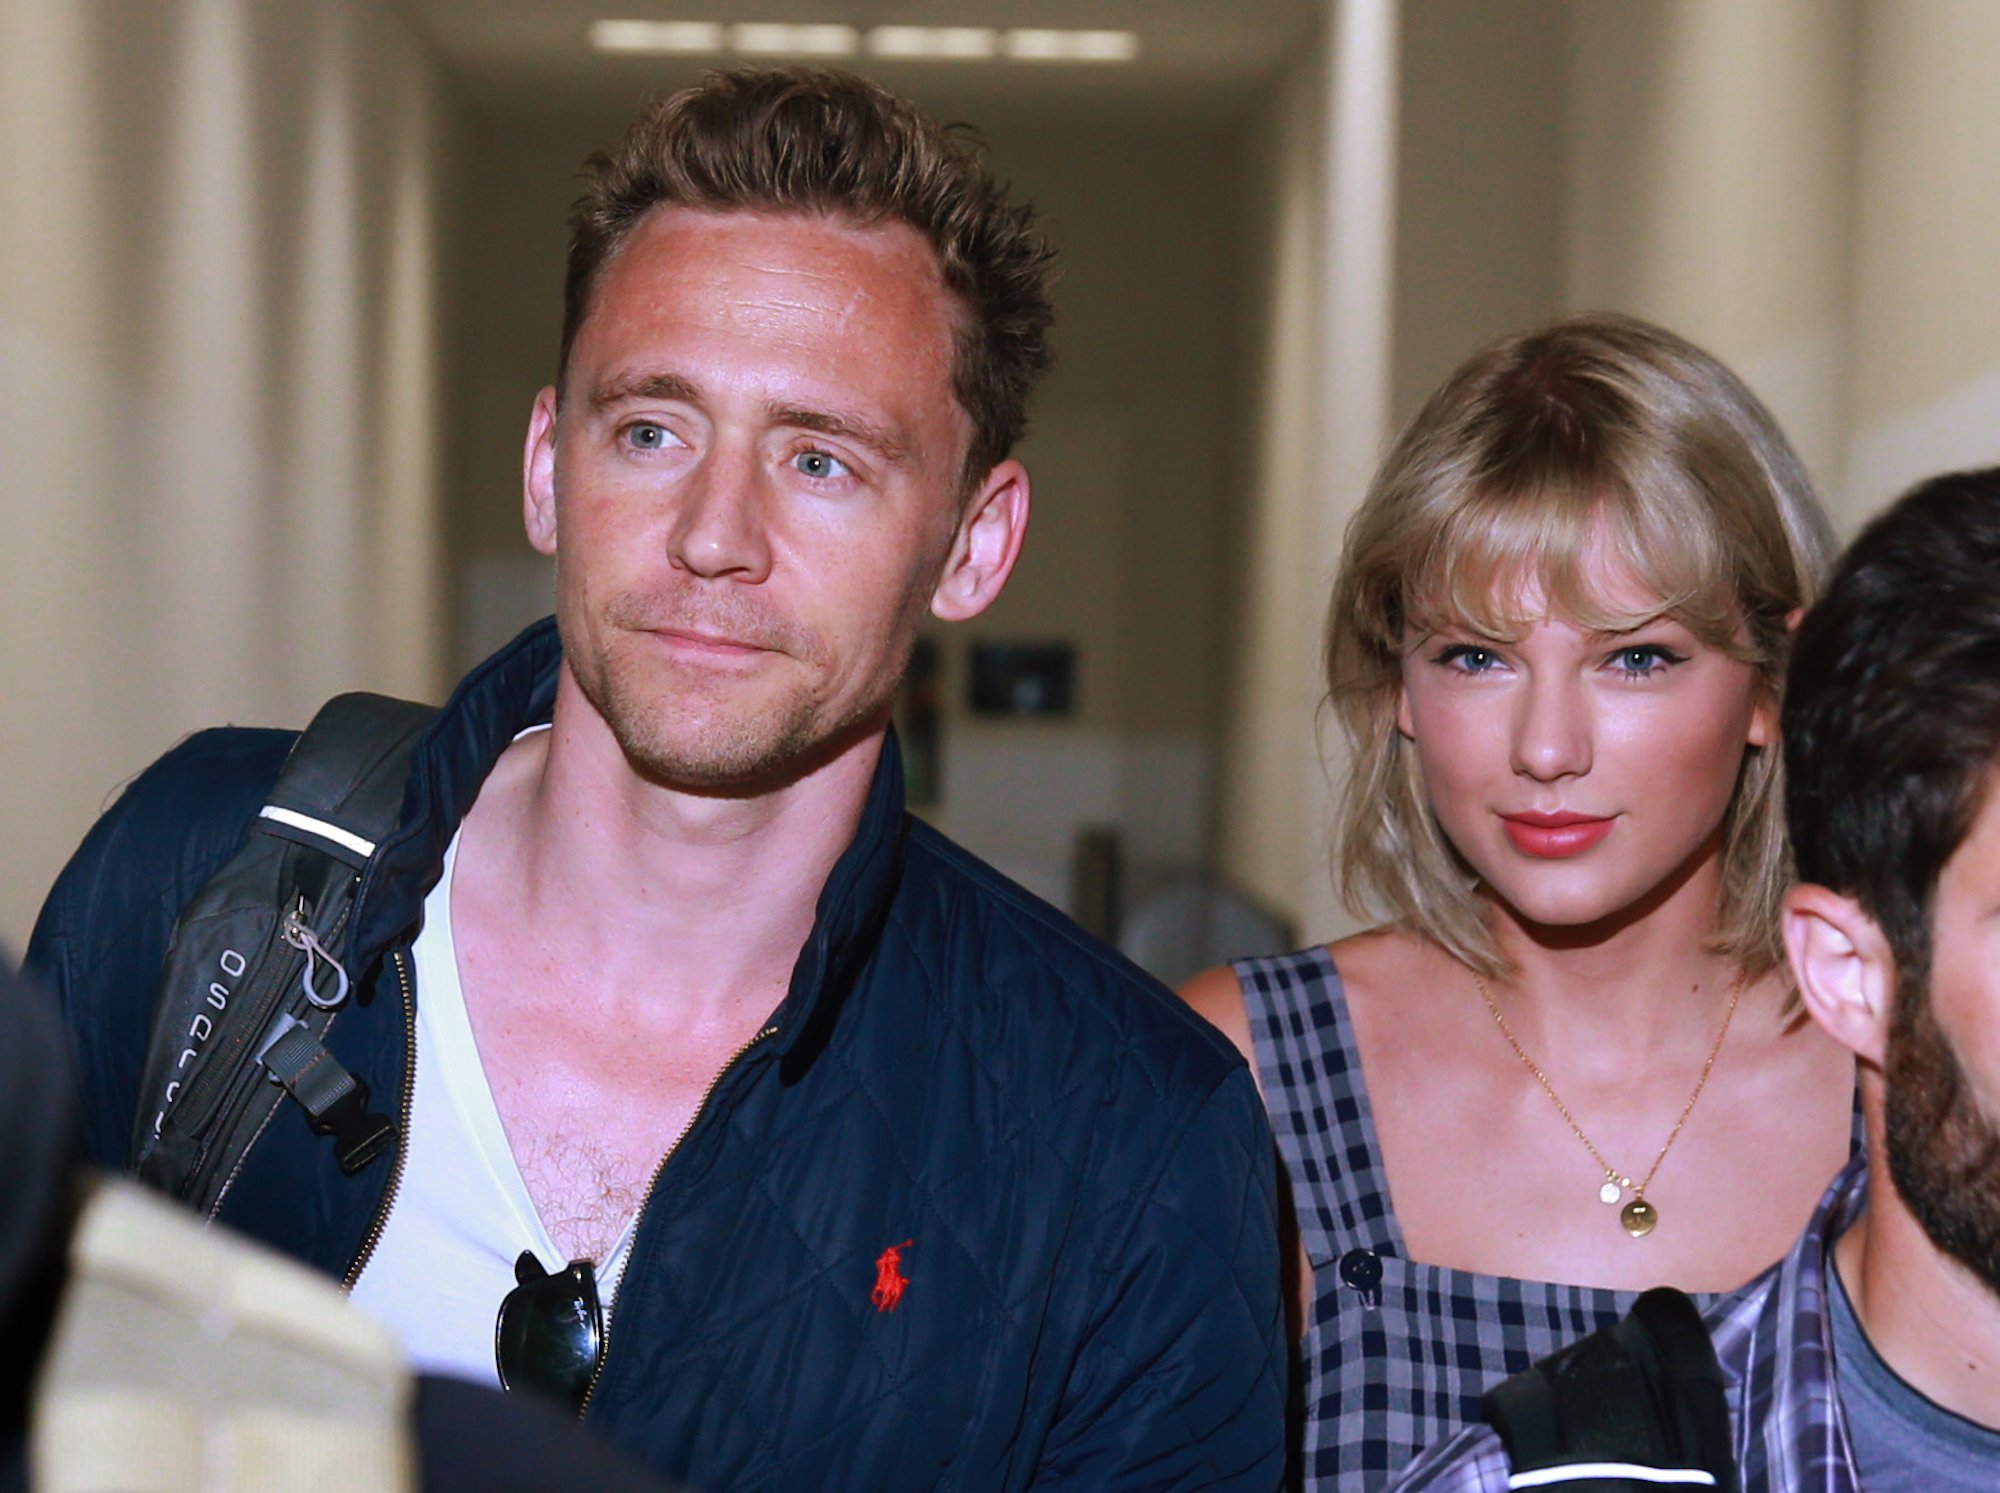 Tom Hiddleston Hinted He Left Public Eye Due To Taylor Swift Relationship And Media Scrutiny